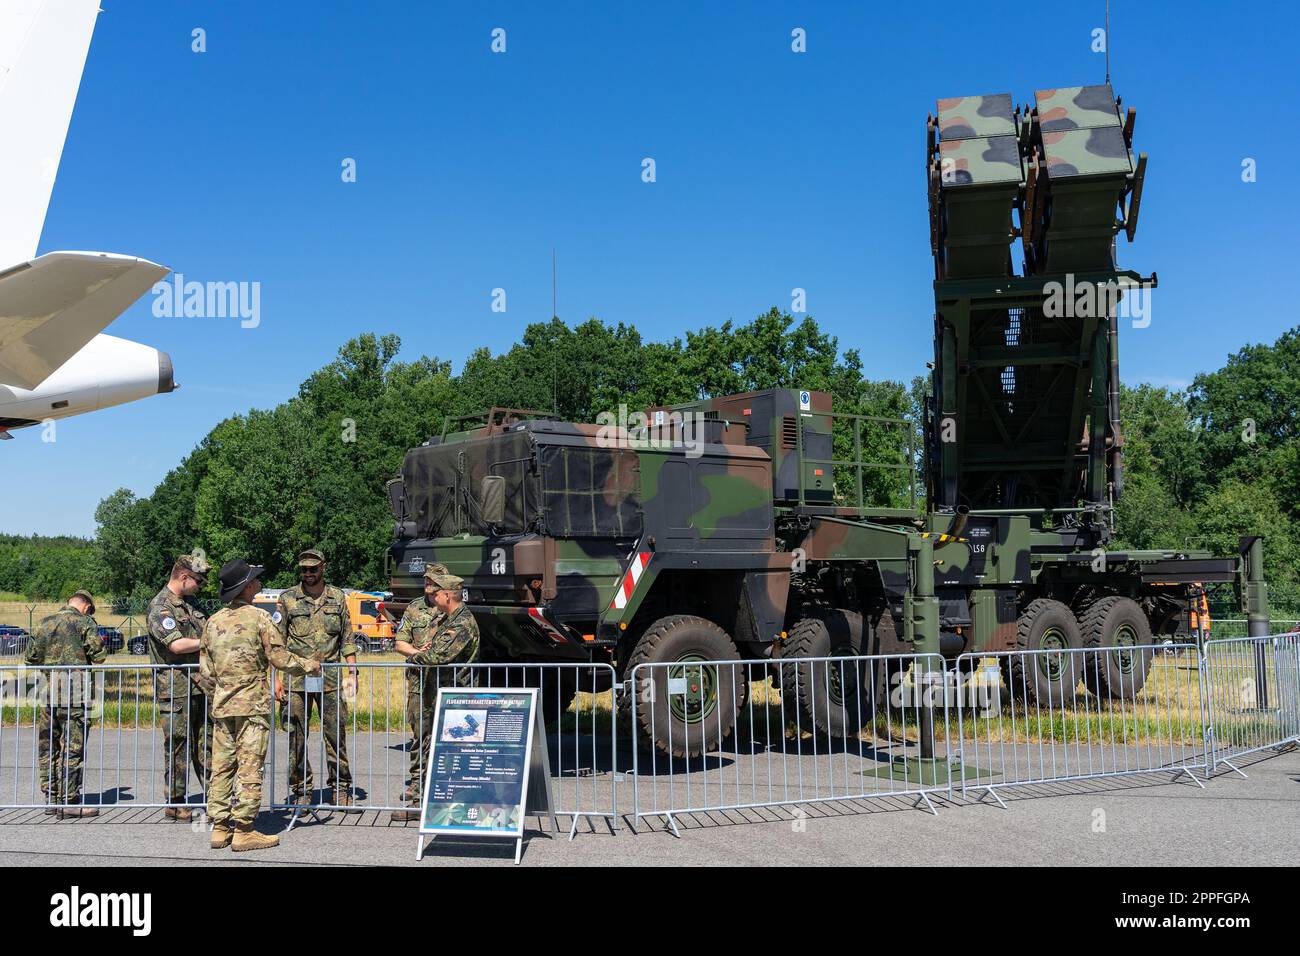 BERLIN, GERMANY - JUNE 23, 2022: Mobile surface-to-air missile and anti-ballistic missile system MIM-104 Patriot. German Air Force. Exhibition ILA Berlin Air Show 2022 Stock Photo